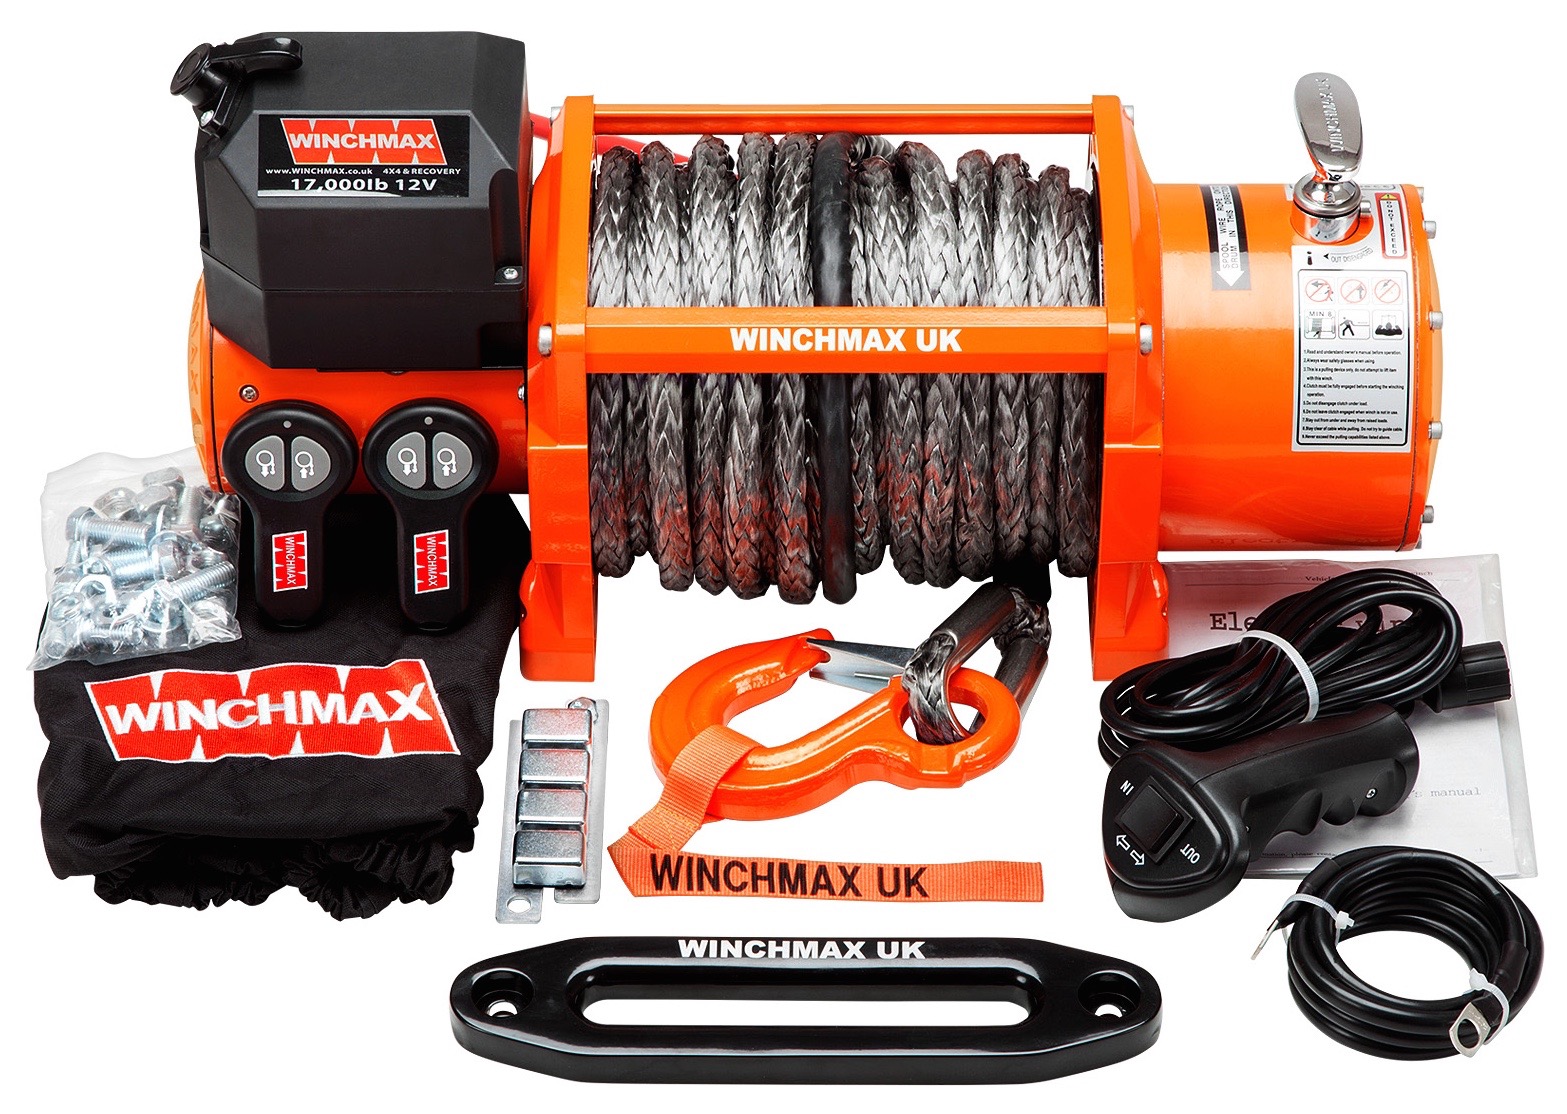 WINCHMAX 17000LB 24V ELECTRIC WINCH DYNEEMA SYNTHETIC ROPE WITH WIRELESS REMOTES